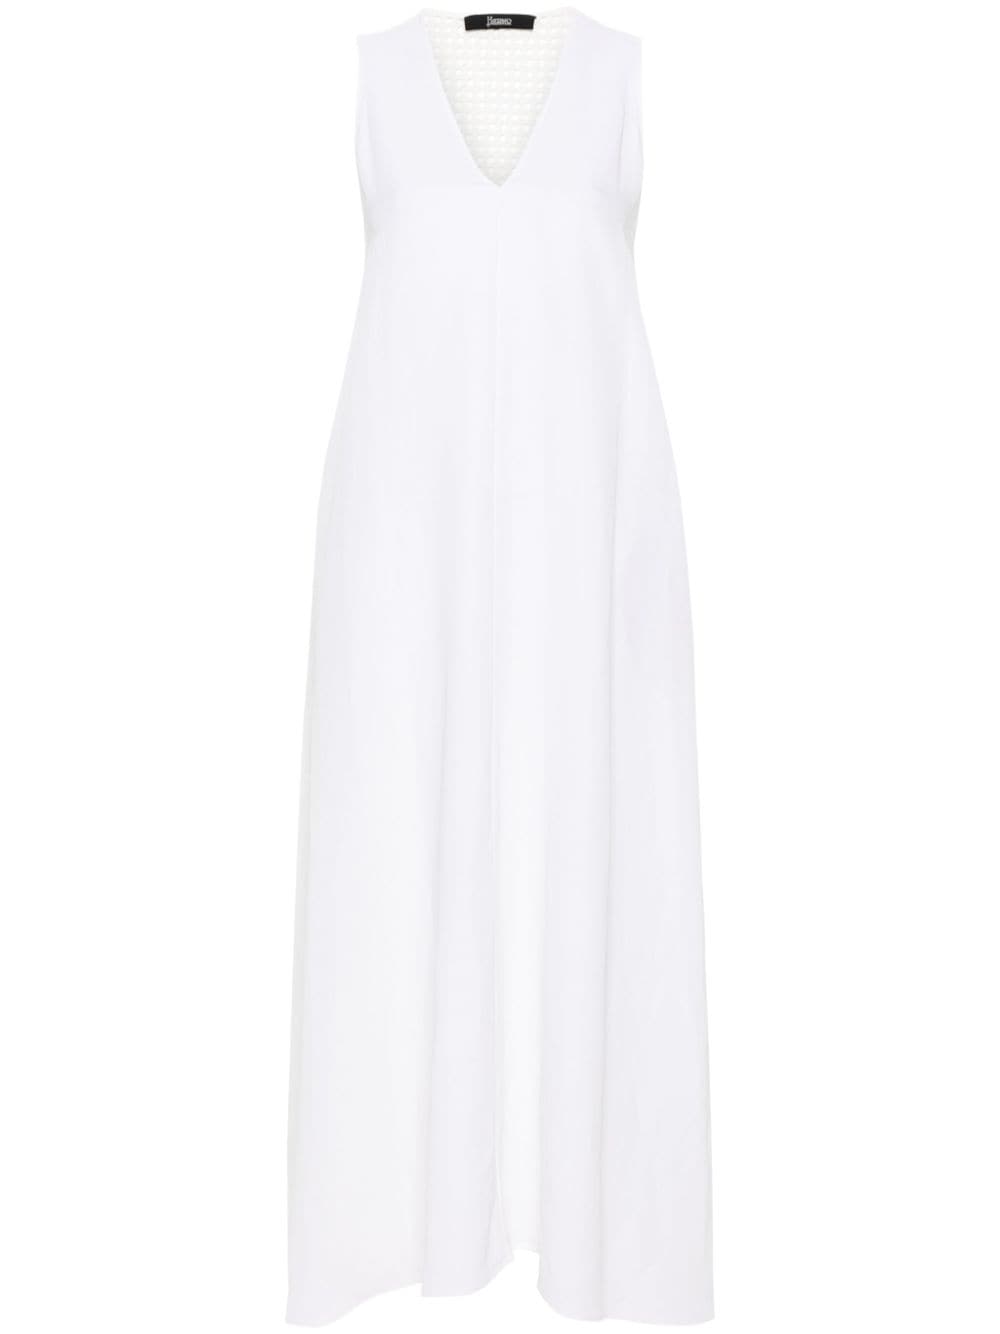 Herno Lace-panelling Sleeveless Dress In White